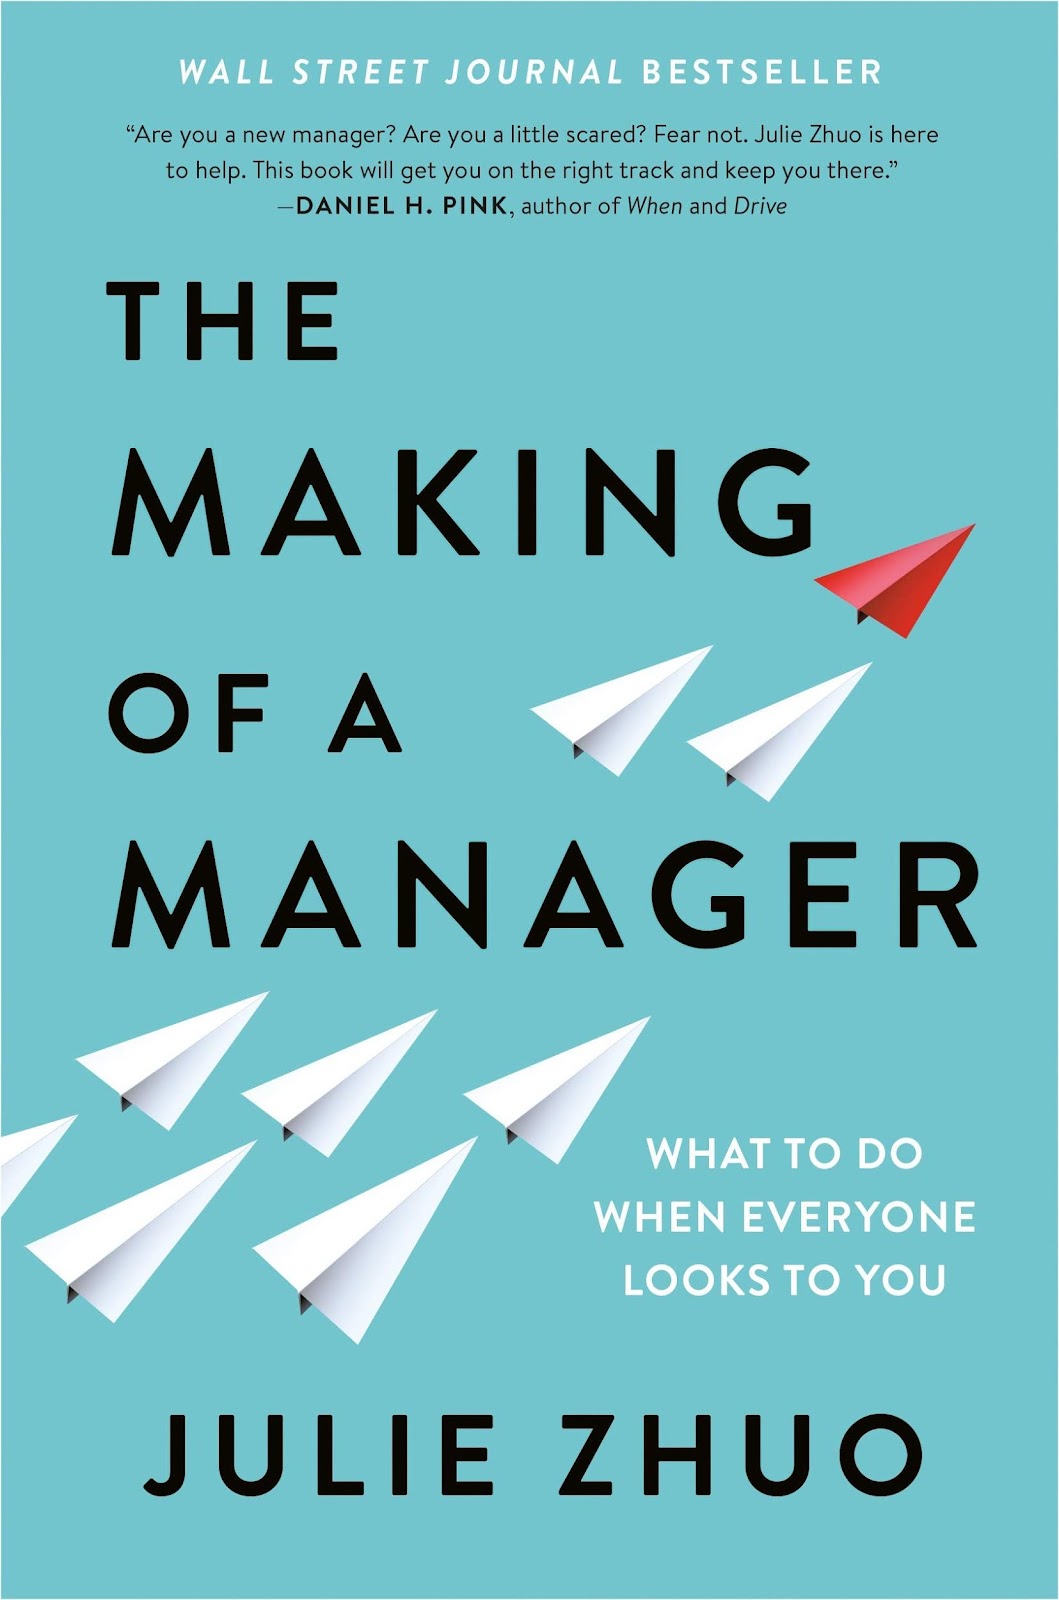 Livro “The Making of a Manager”